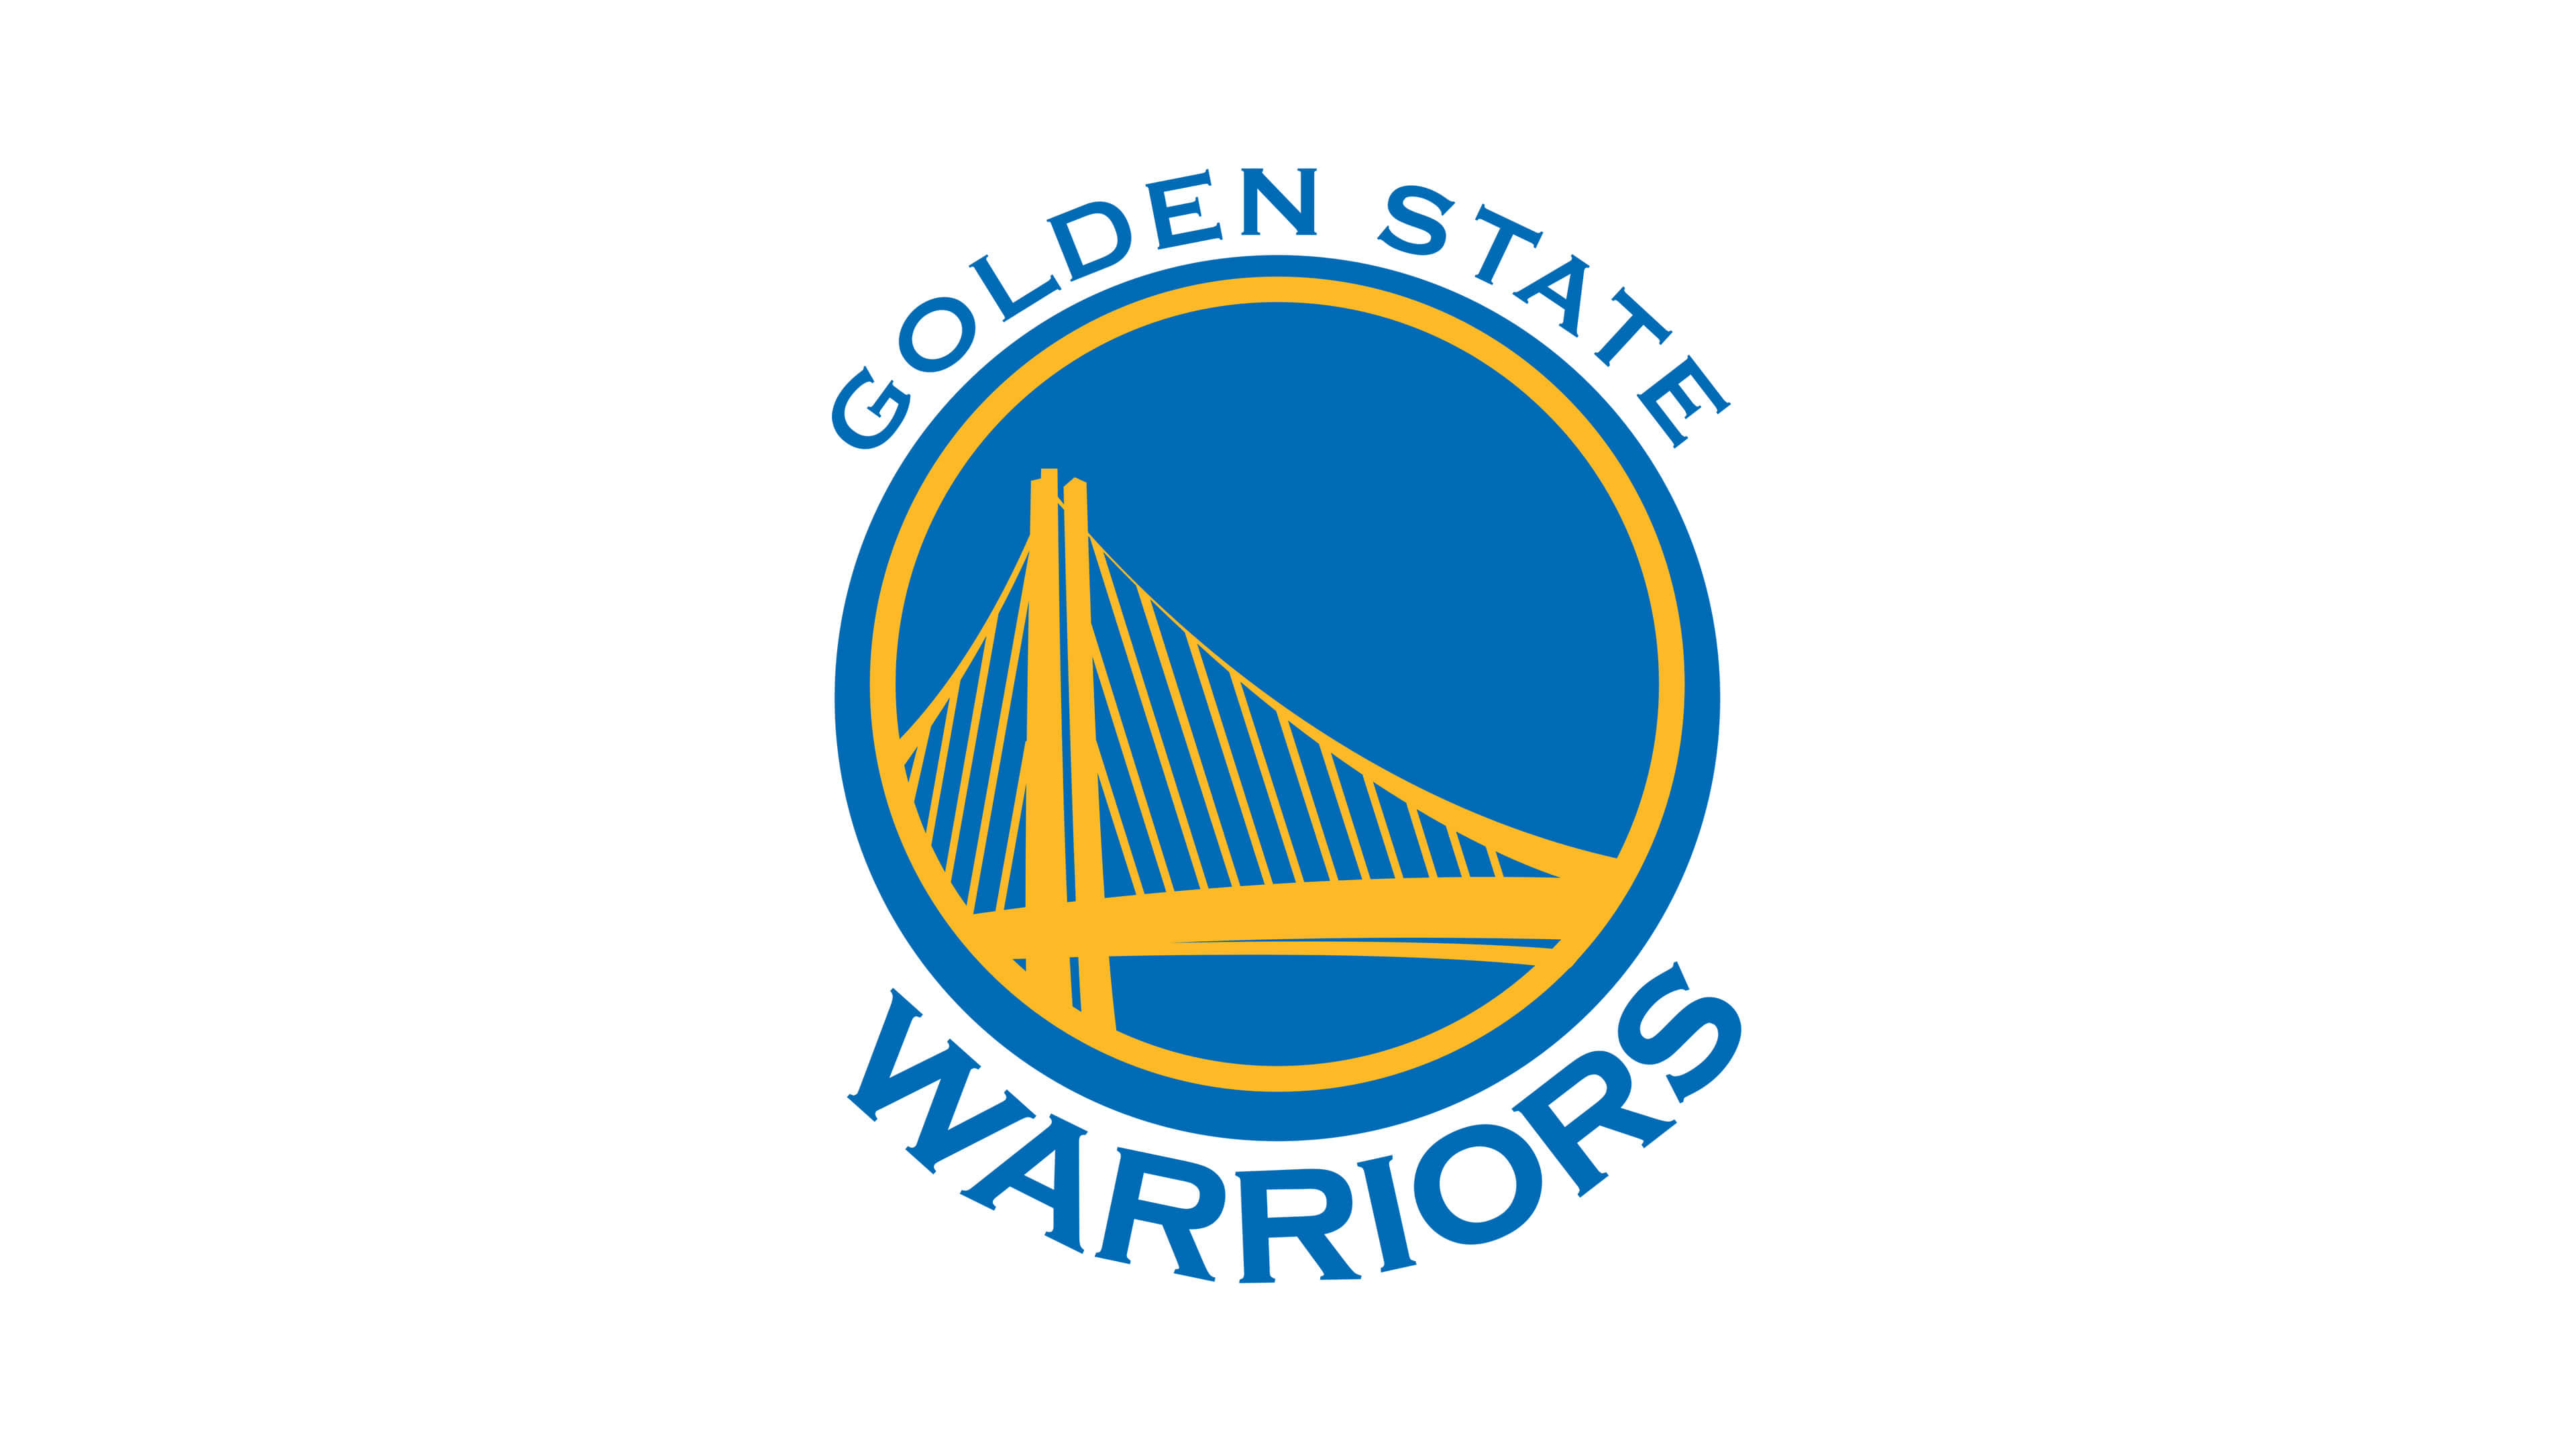 Golden State Warriors: An American professional basketball team based in San Francisco, NBA. 3840x2160 4K Background.